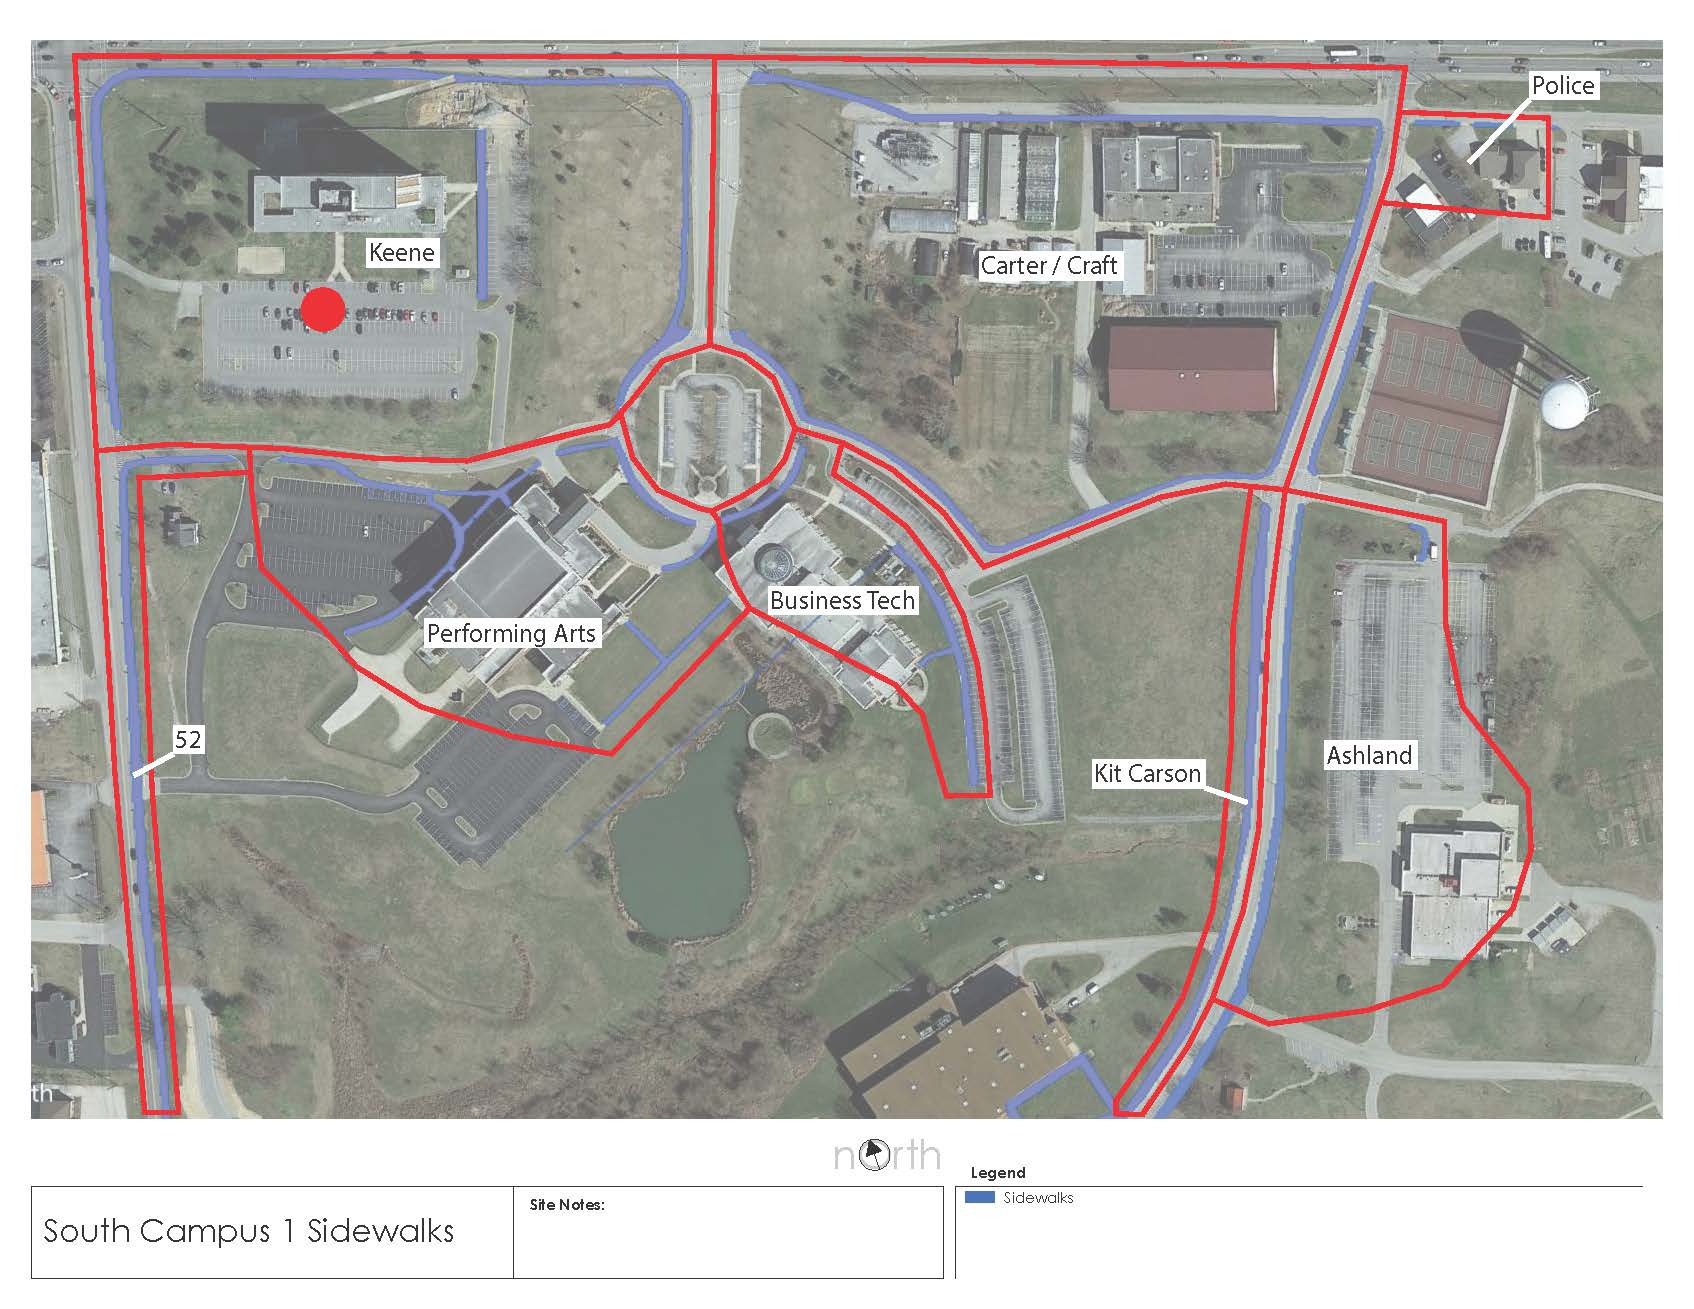 The snow and ice removal plan for South Campus sidewalks at Eastern Kentucky University.